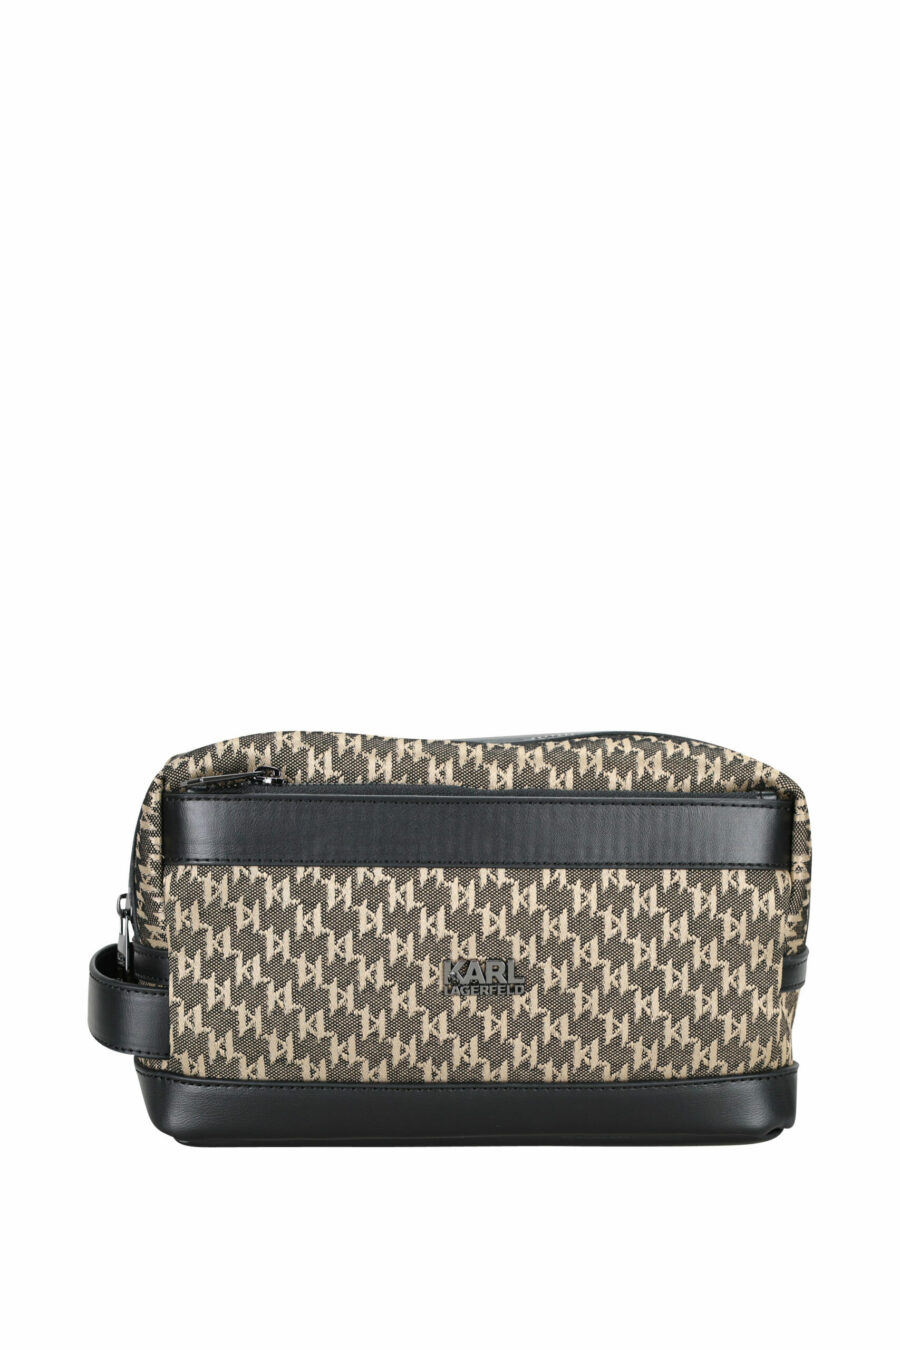 Toilet bag monogrammed grey with black - 4062226427401 scaled